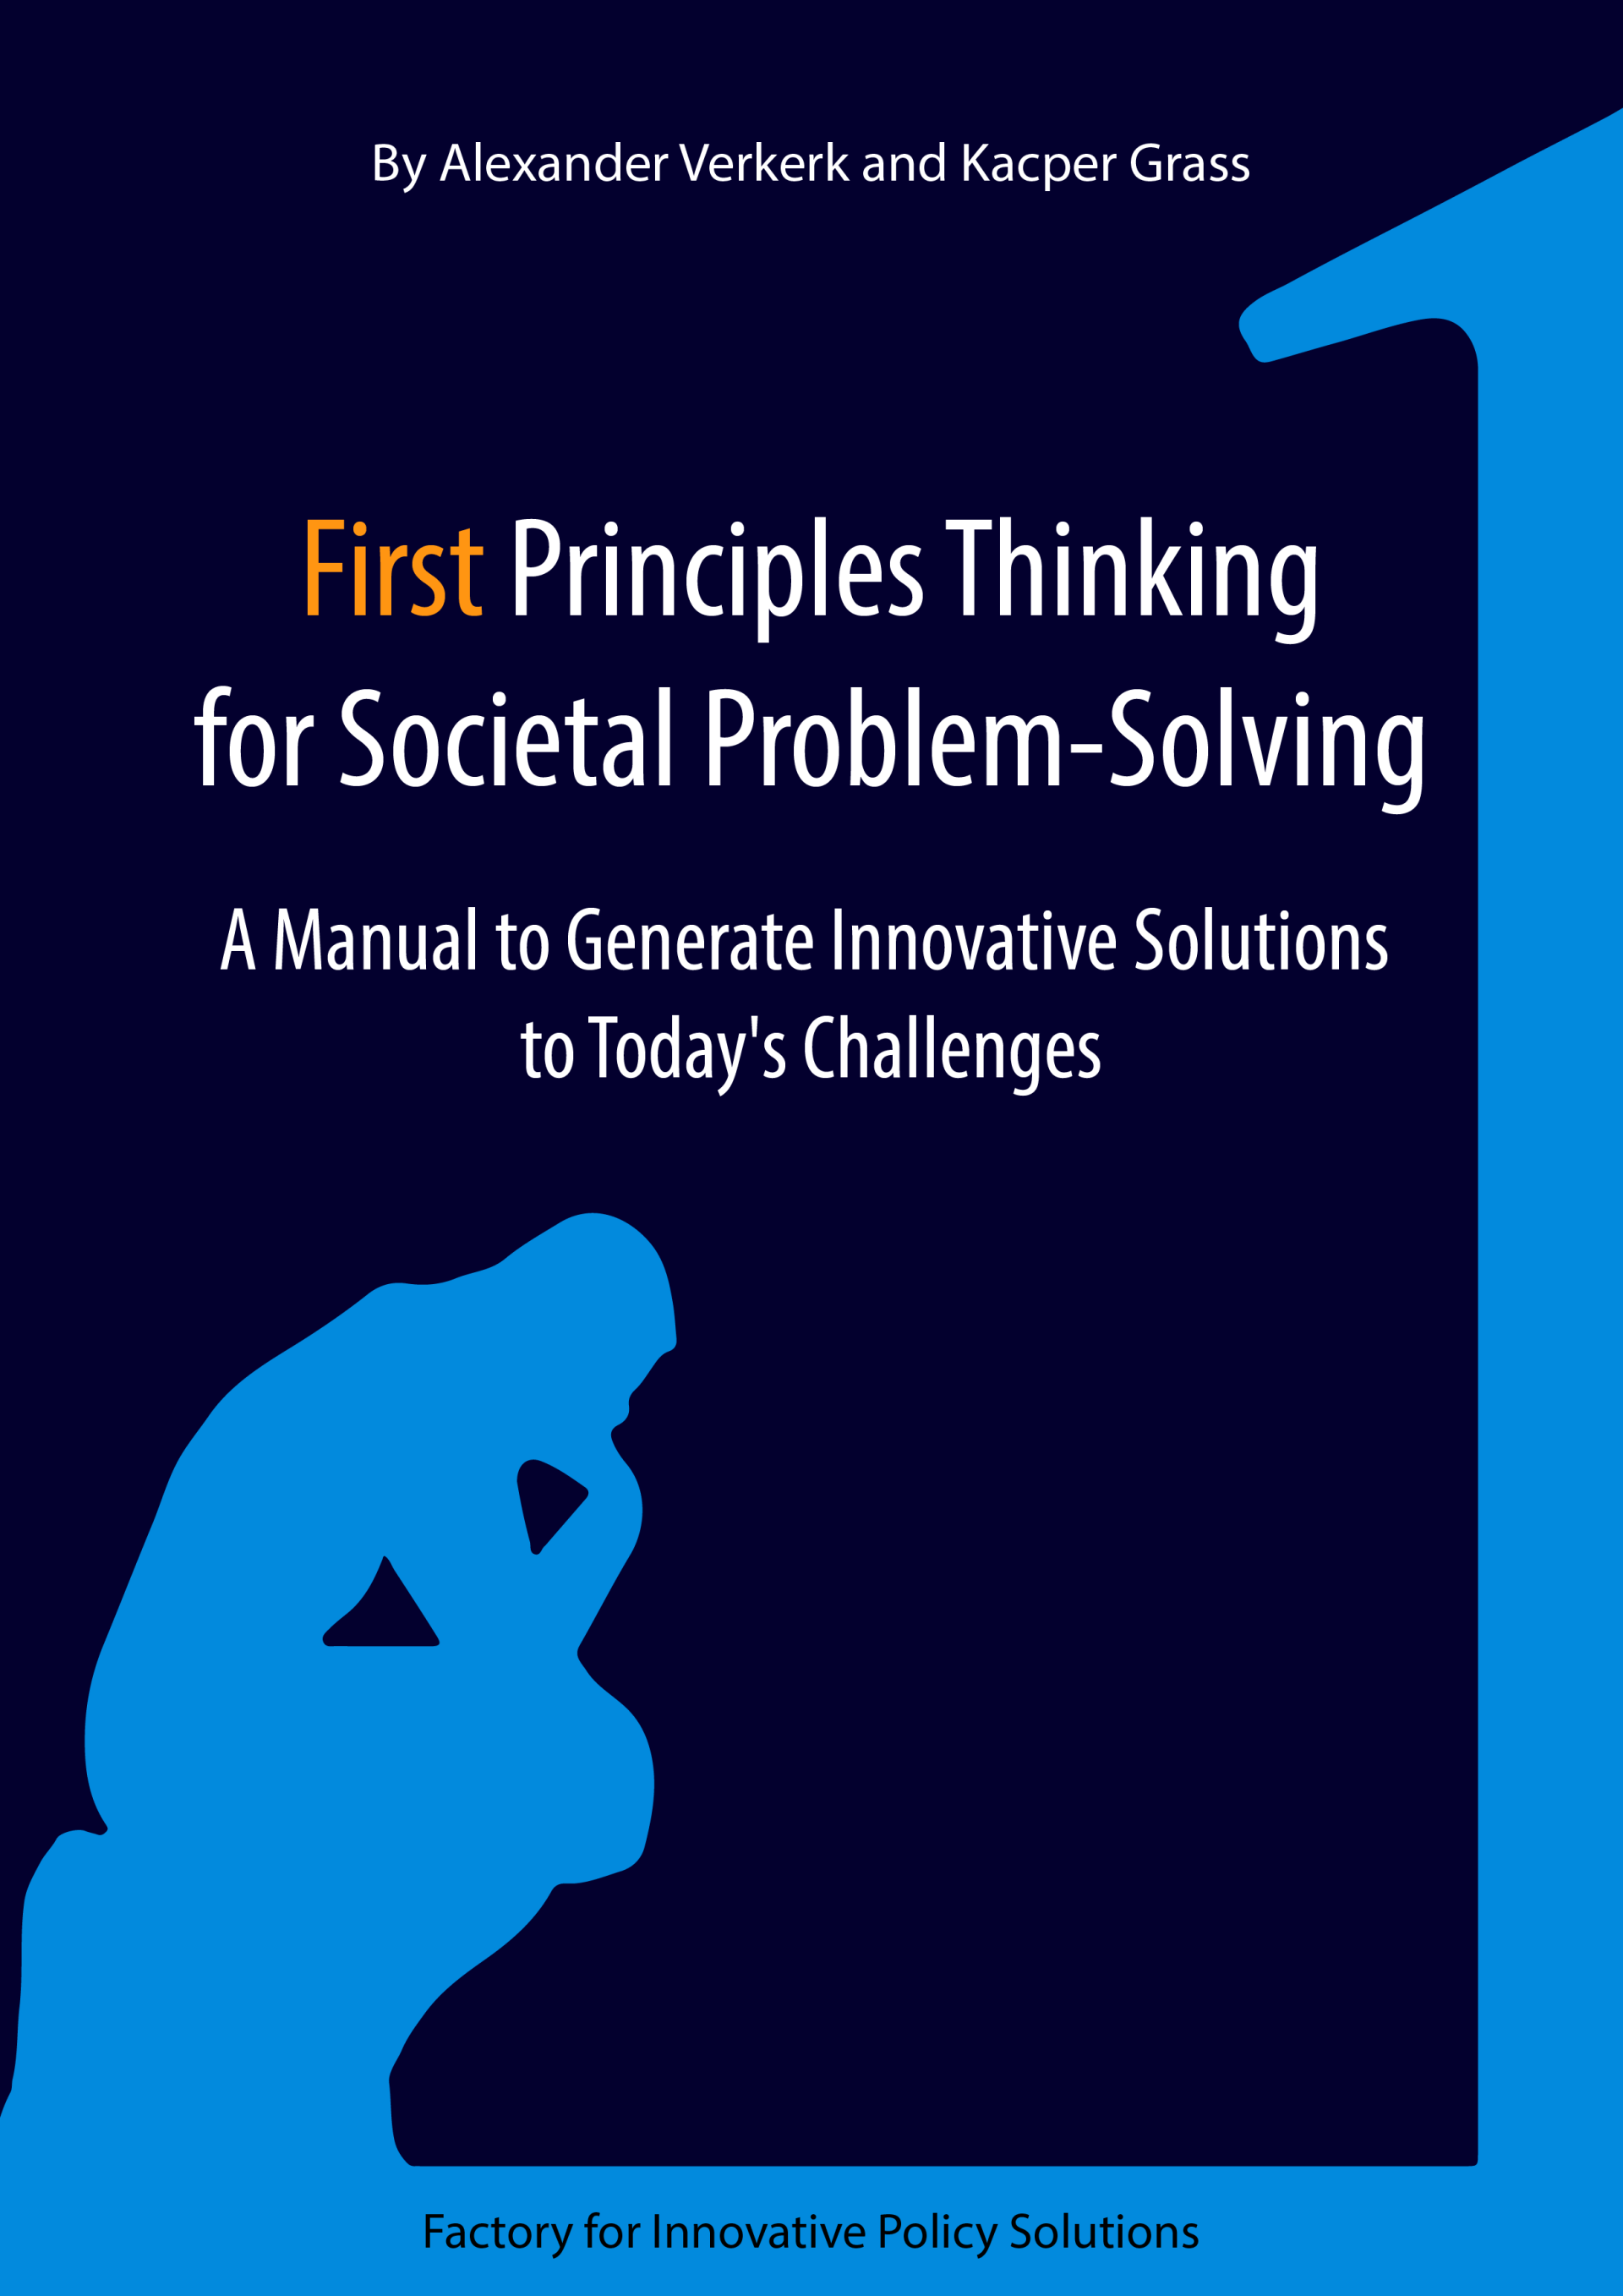 First Principles Thinking for Societal Problem-Solving: A Manual to Generate Innovative Policy Solutions to Today's Challenges